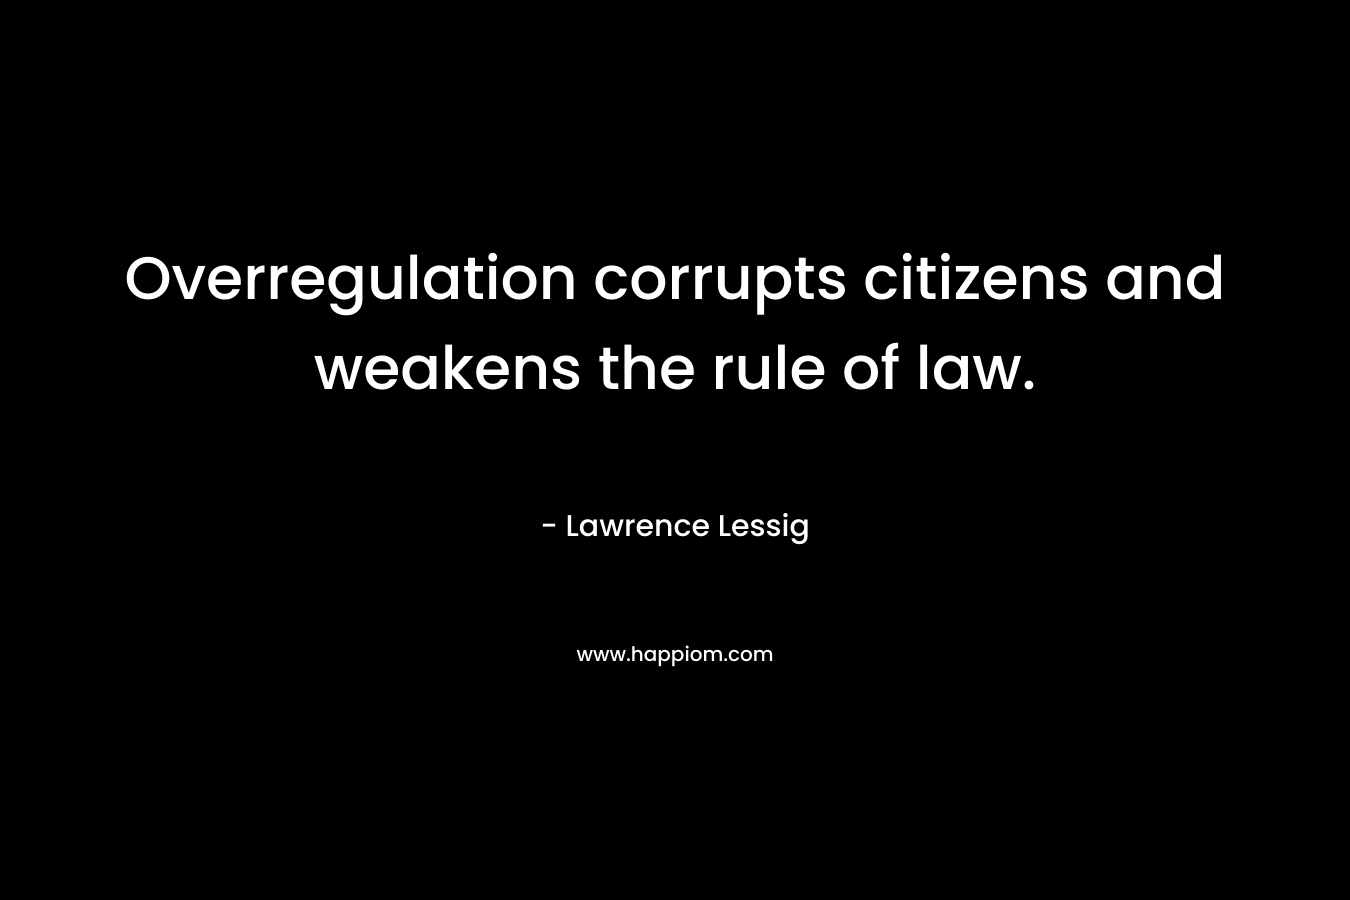 Overregulation corrupts citizens and weakens the rule of law. – Lawrence Lessig